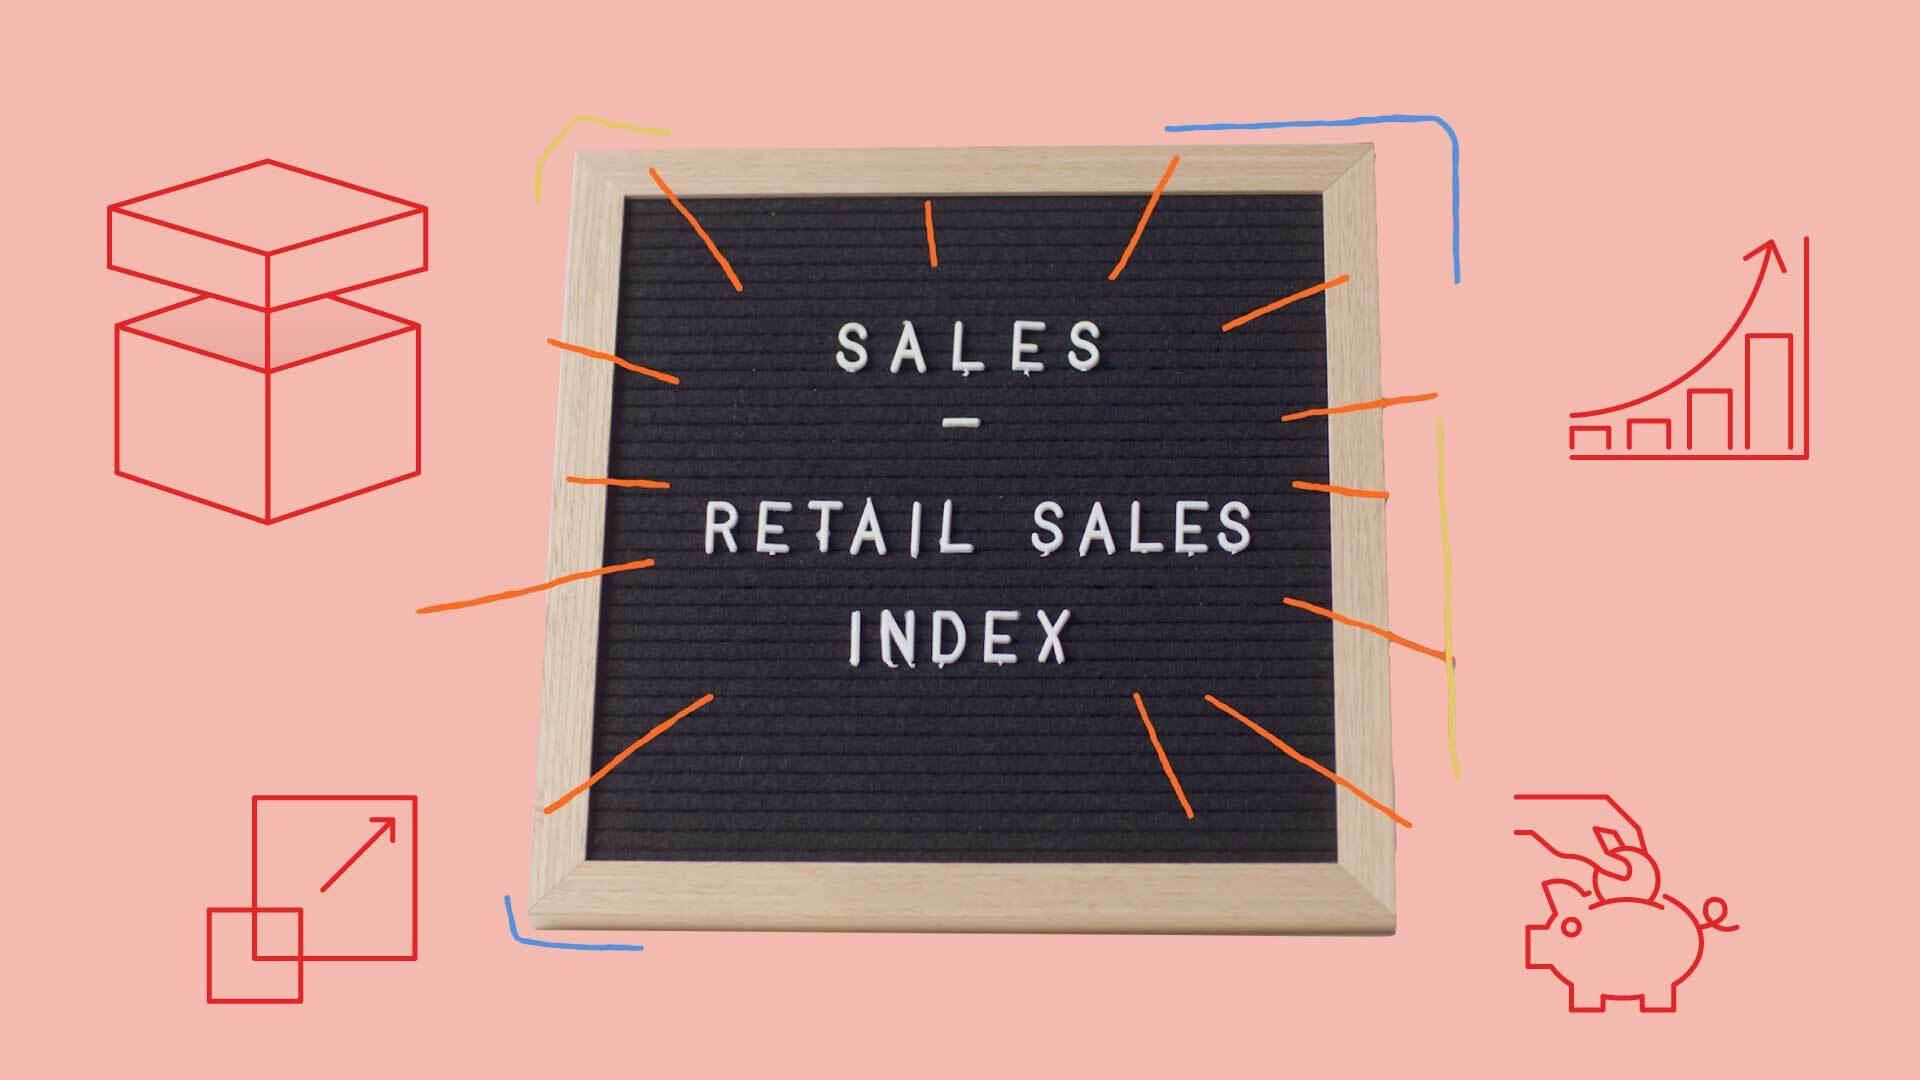 A letter board reads "Sales – Retail Sales Index"